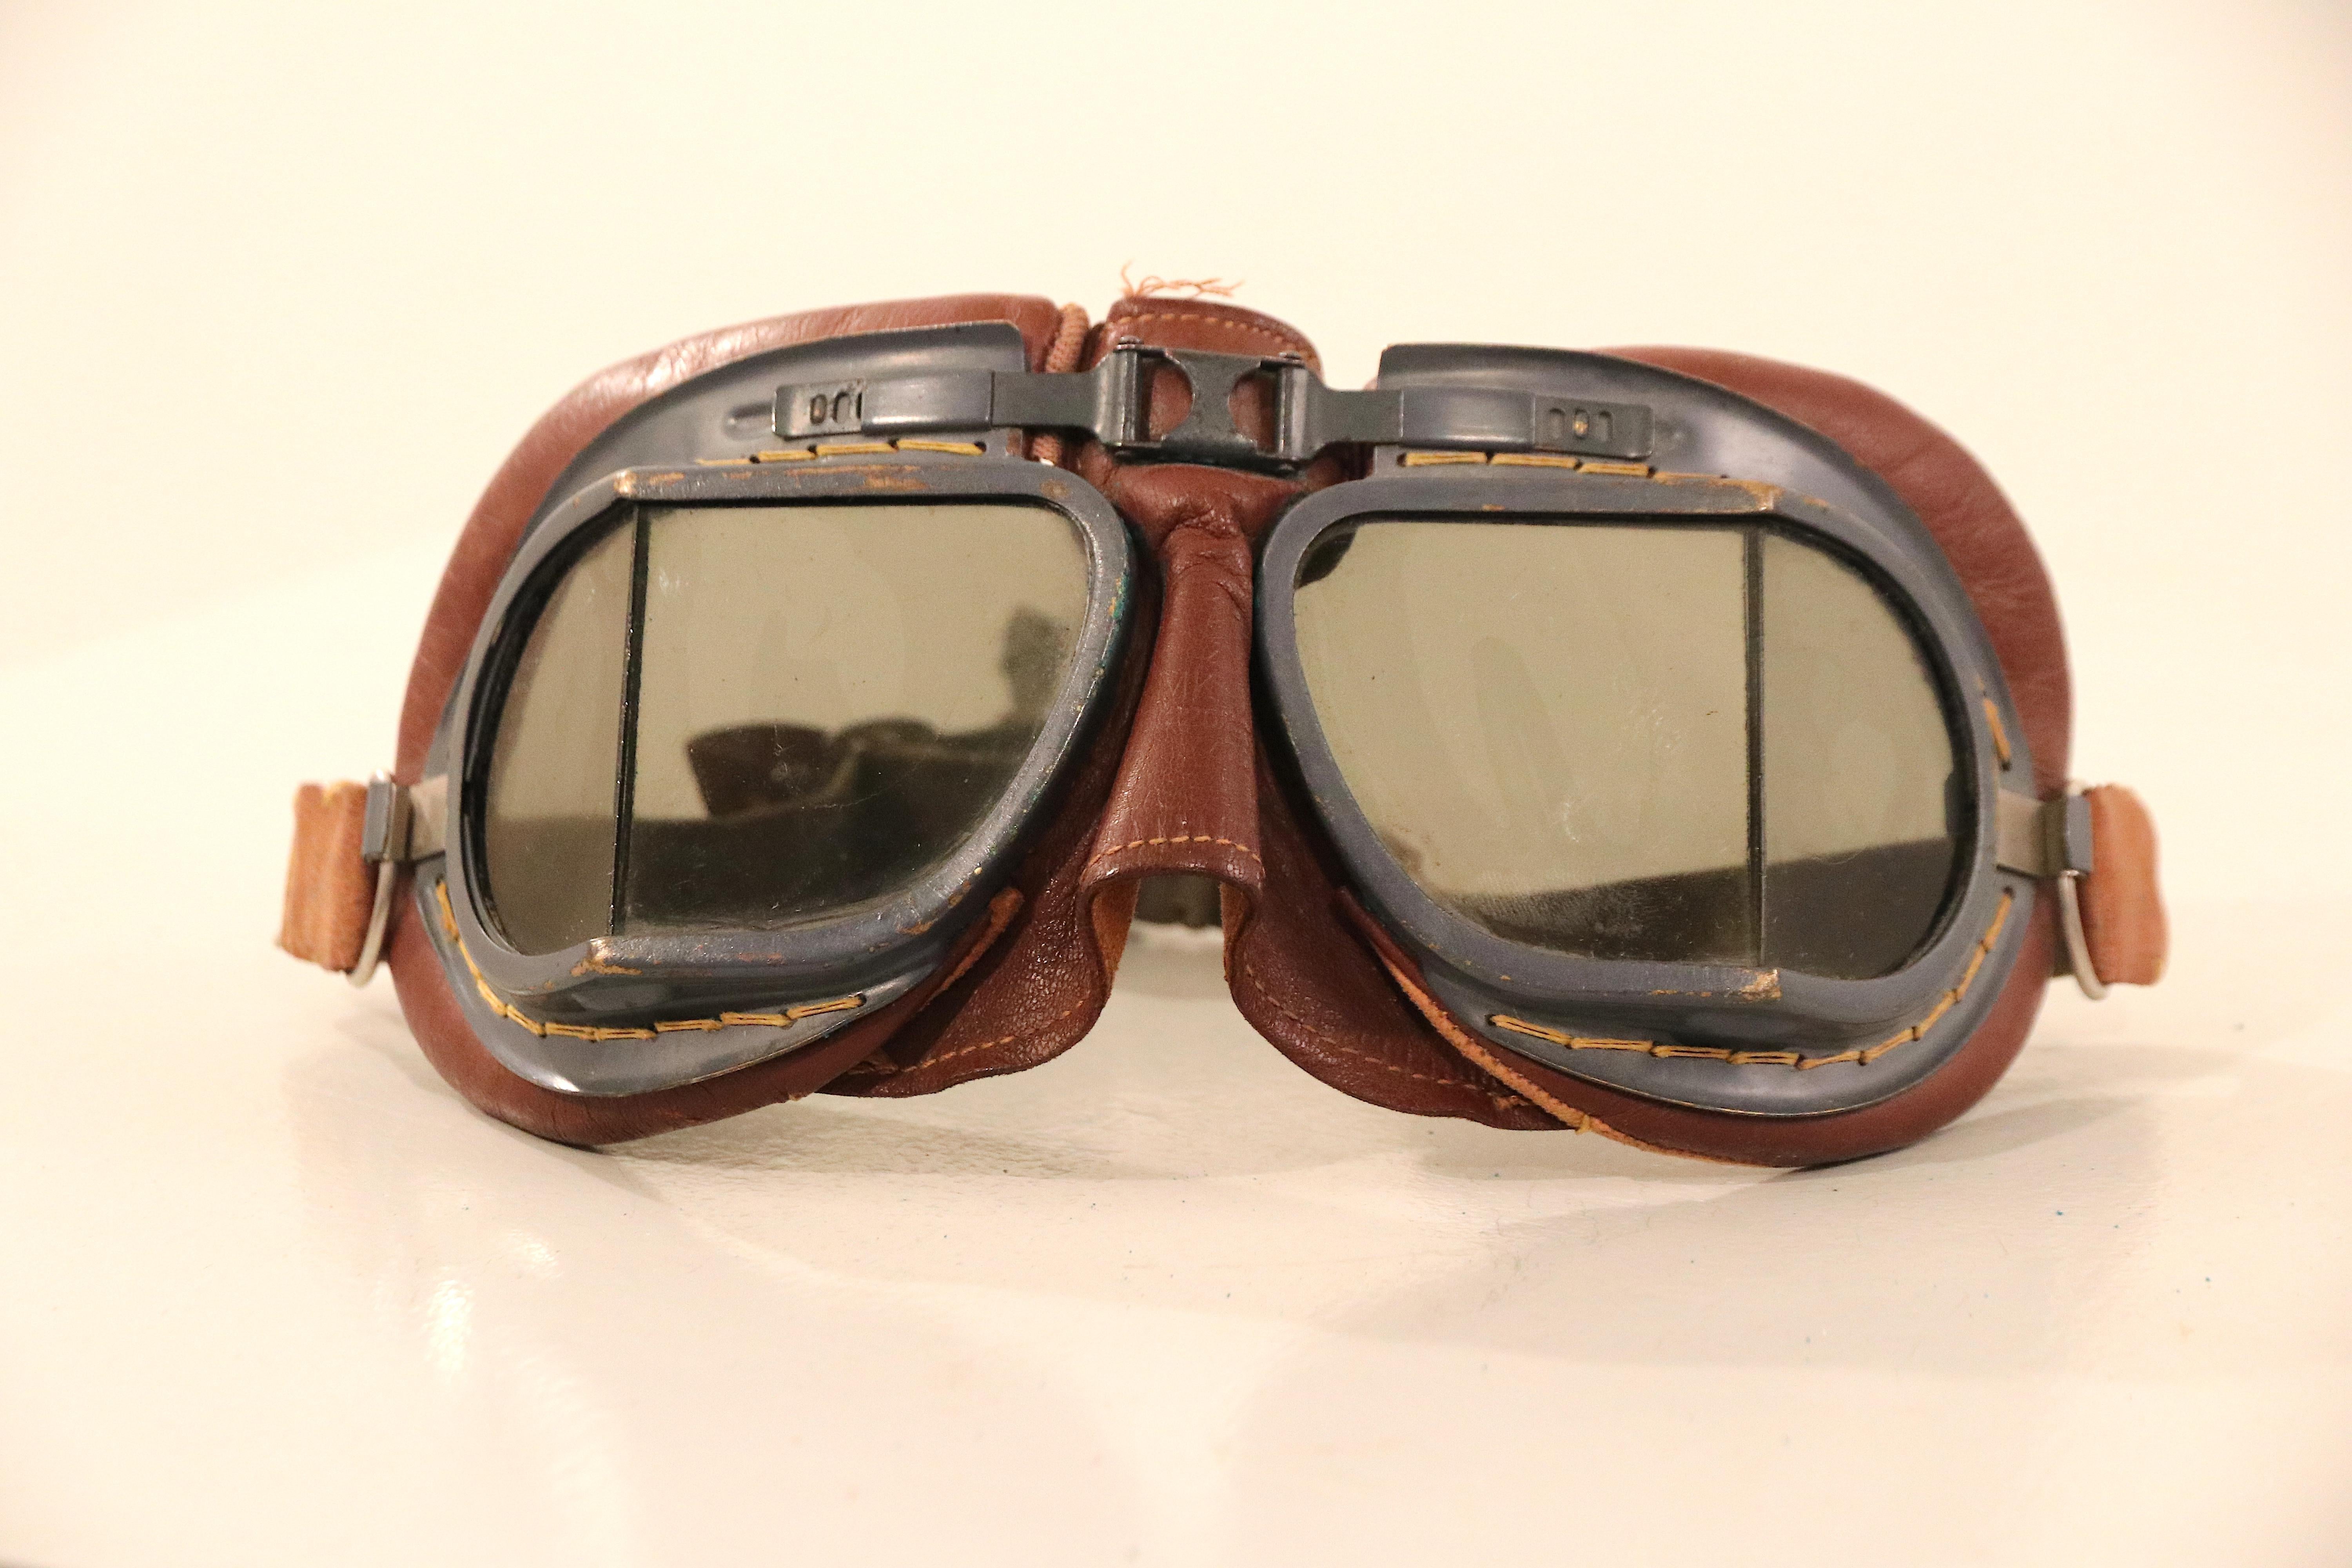 Original British Army aviator goggles used by pilots of the Royal Air Force during World War II. They were found by a Dutch fire fighter during the war in Holland. 